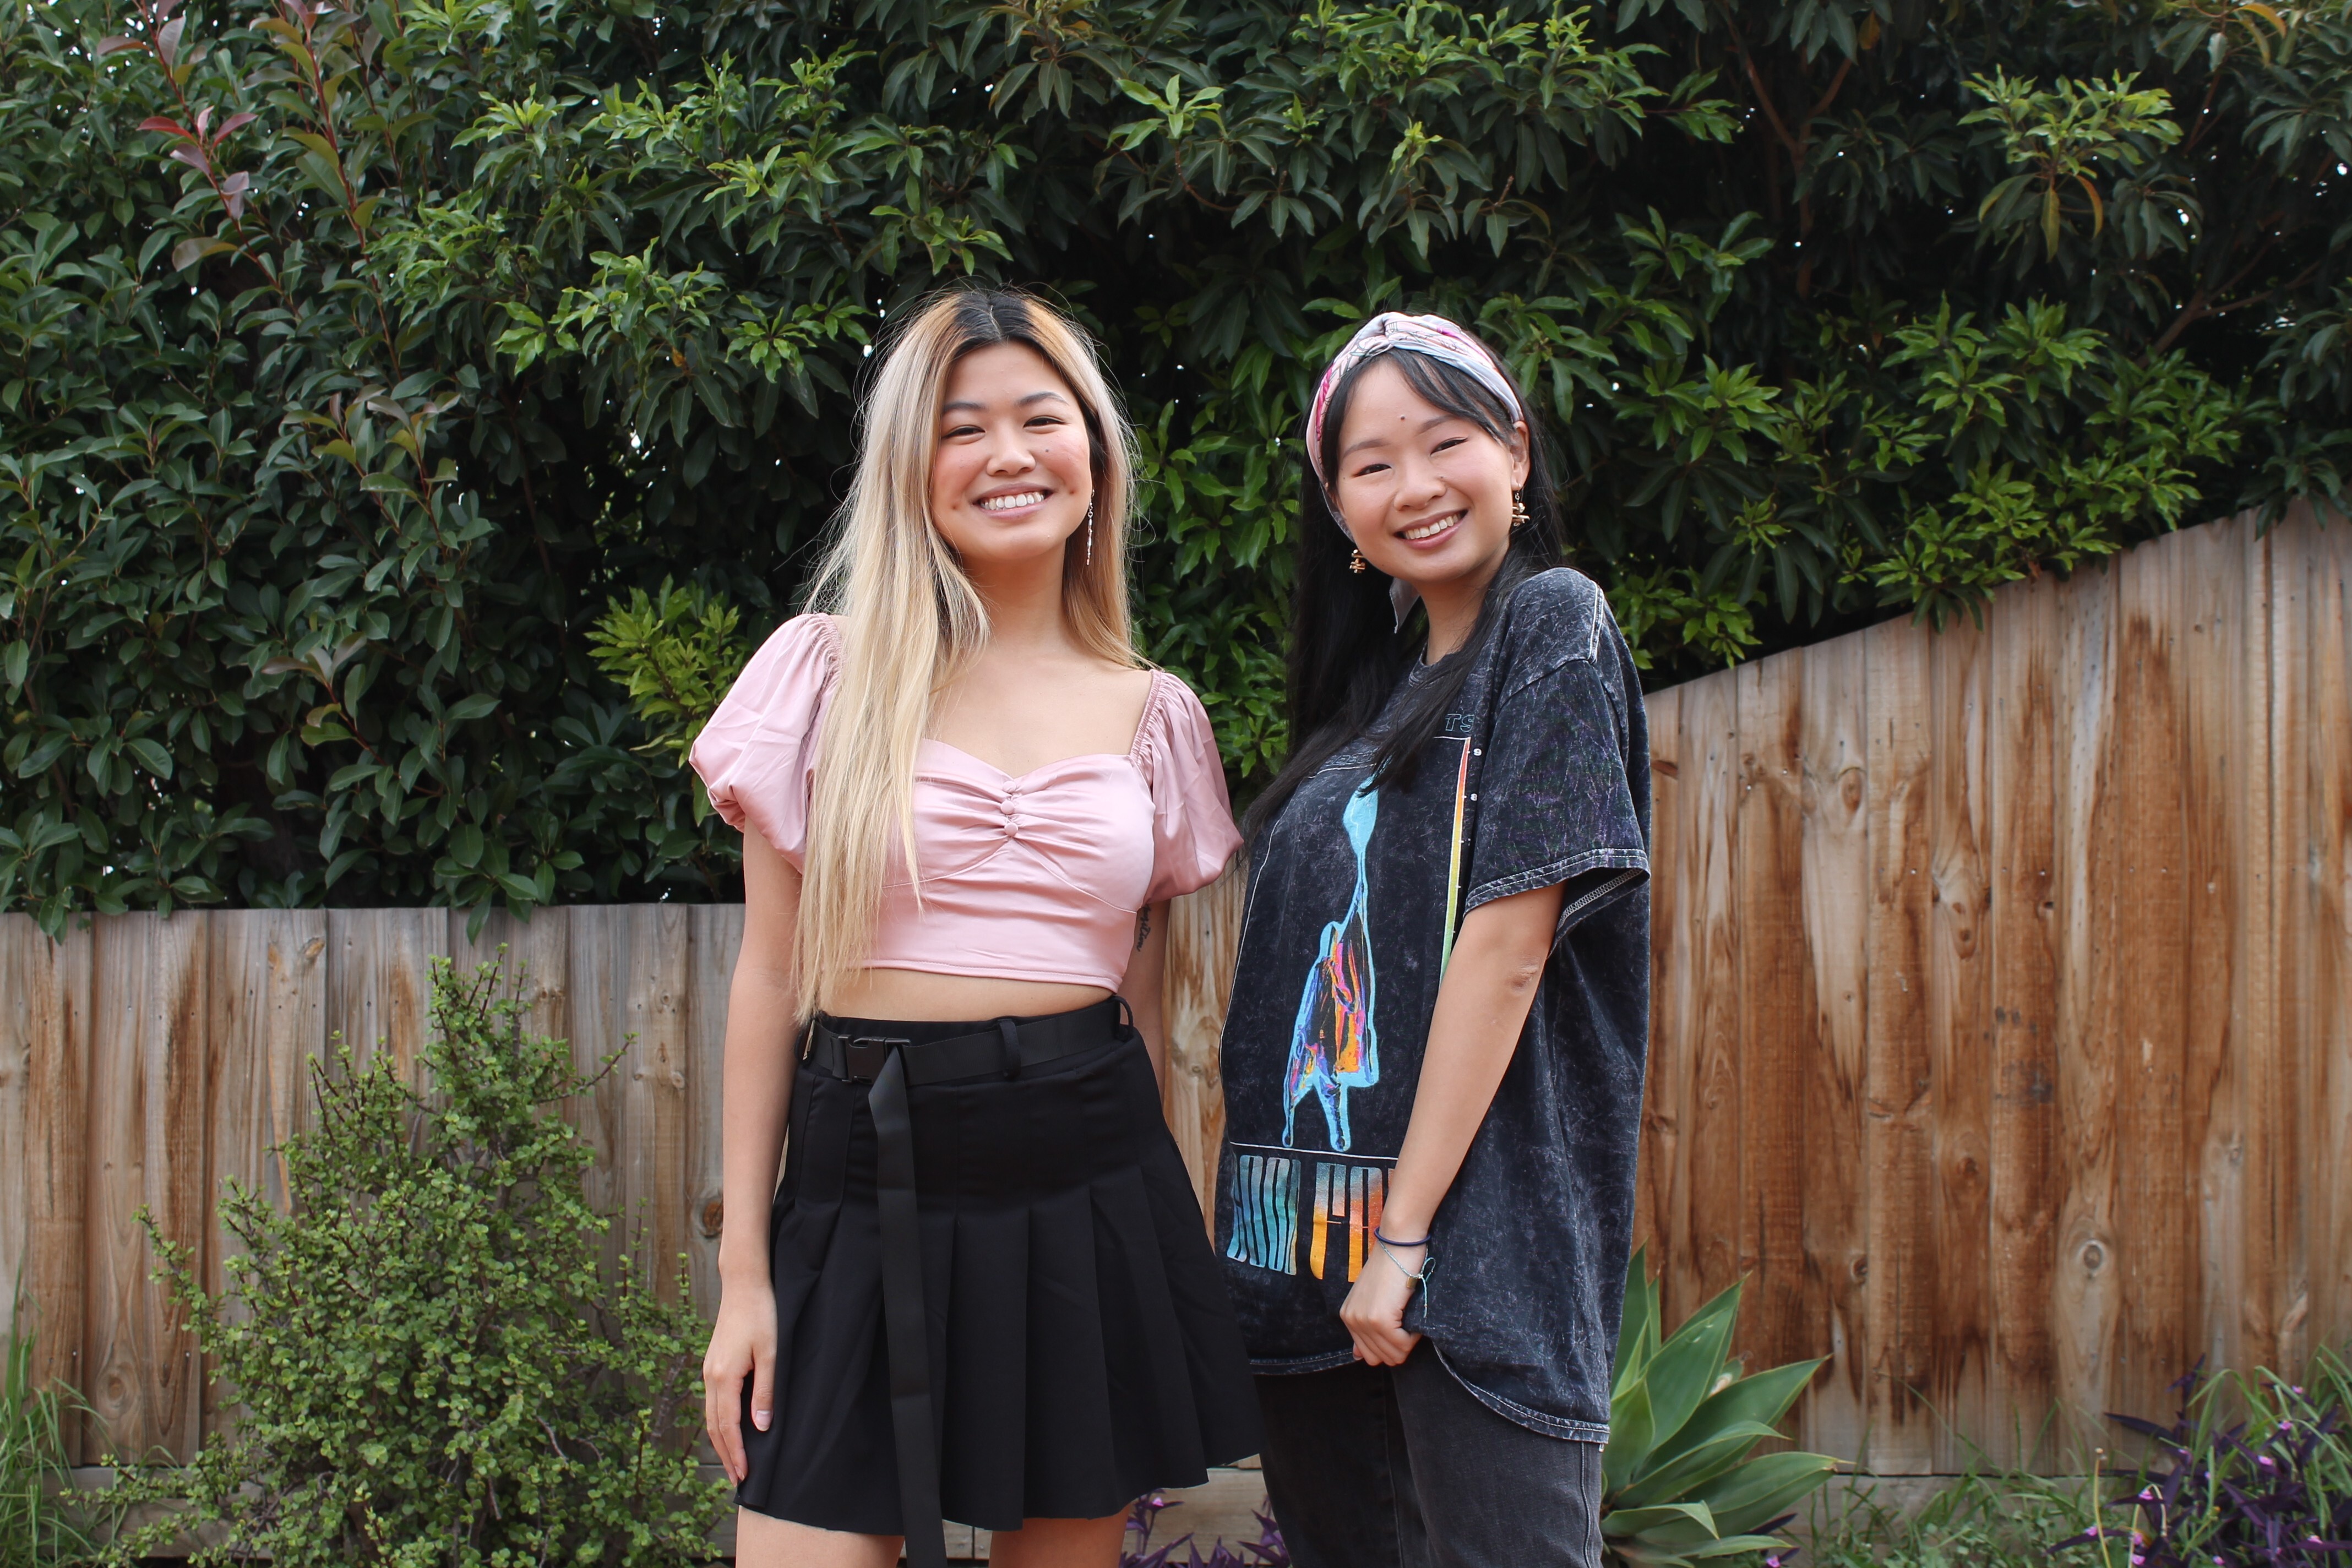 Vietnamese-Australians Tiana Nguyen (left) and Thuy Nguyen, not related, are the pair behind the Unapologetically Asian podcast, in which they embrace their identity as Asian-Australians. Photo: Courtesy of Tiana Nguyen and Thuy Nguyen